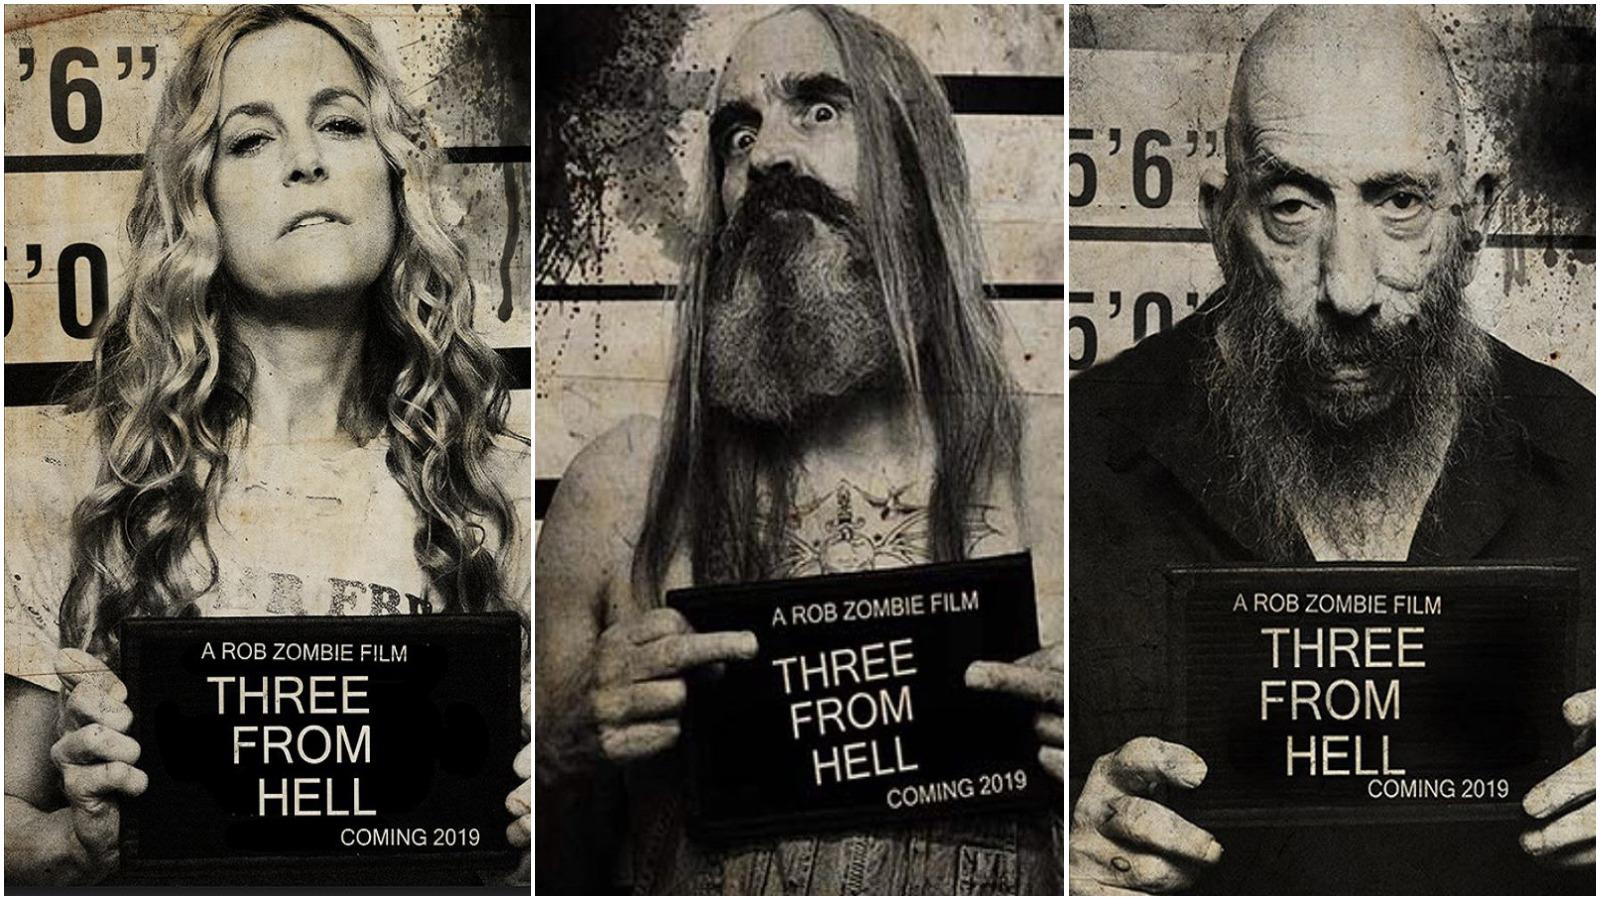 Rob Zombie's '3 From Hell': Hear 3 Chilling New Songs From